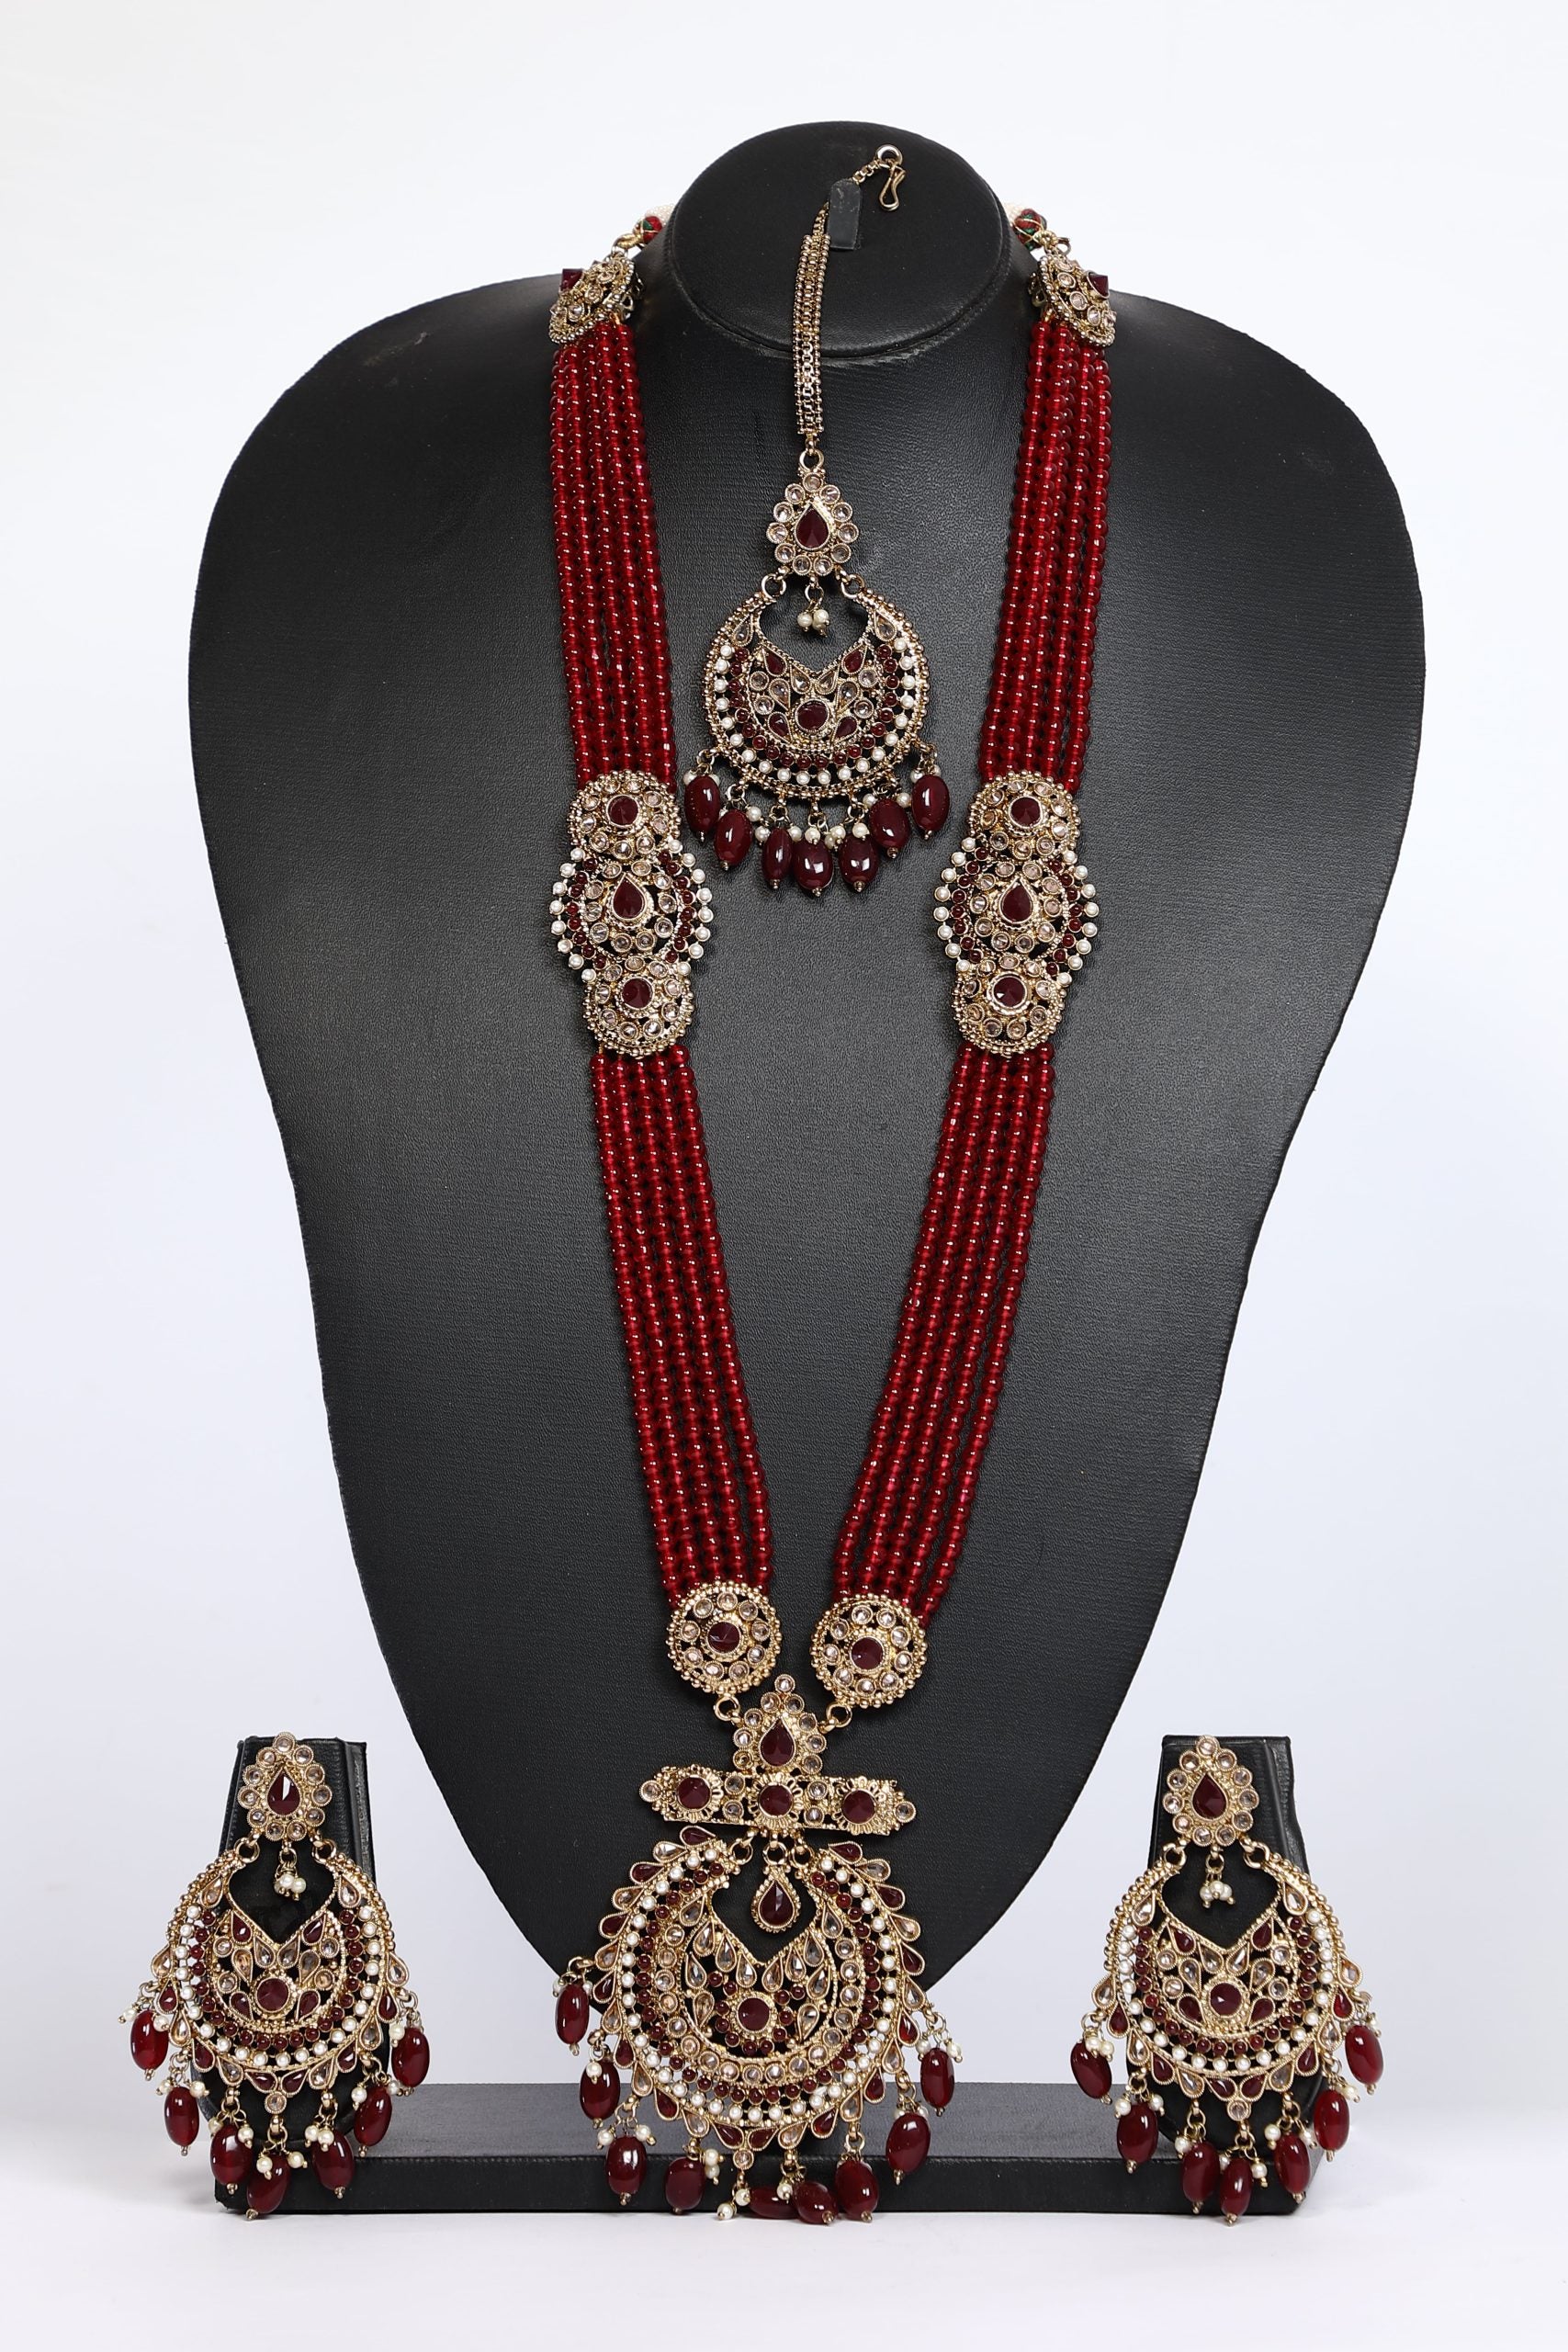 Beaded Heavy Long Necklace Set in Maroon Color For Bridal – 3596